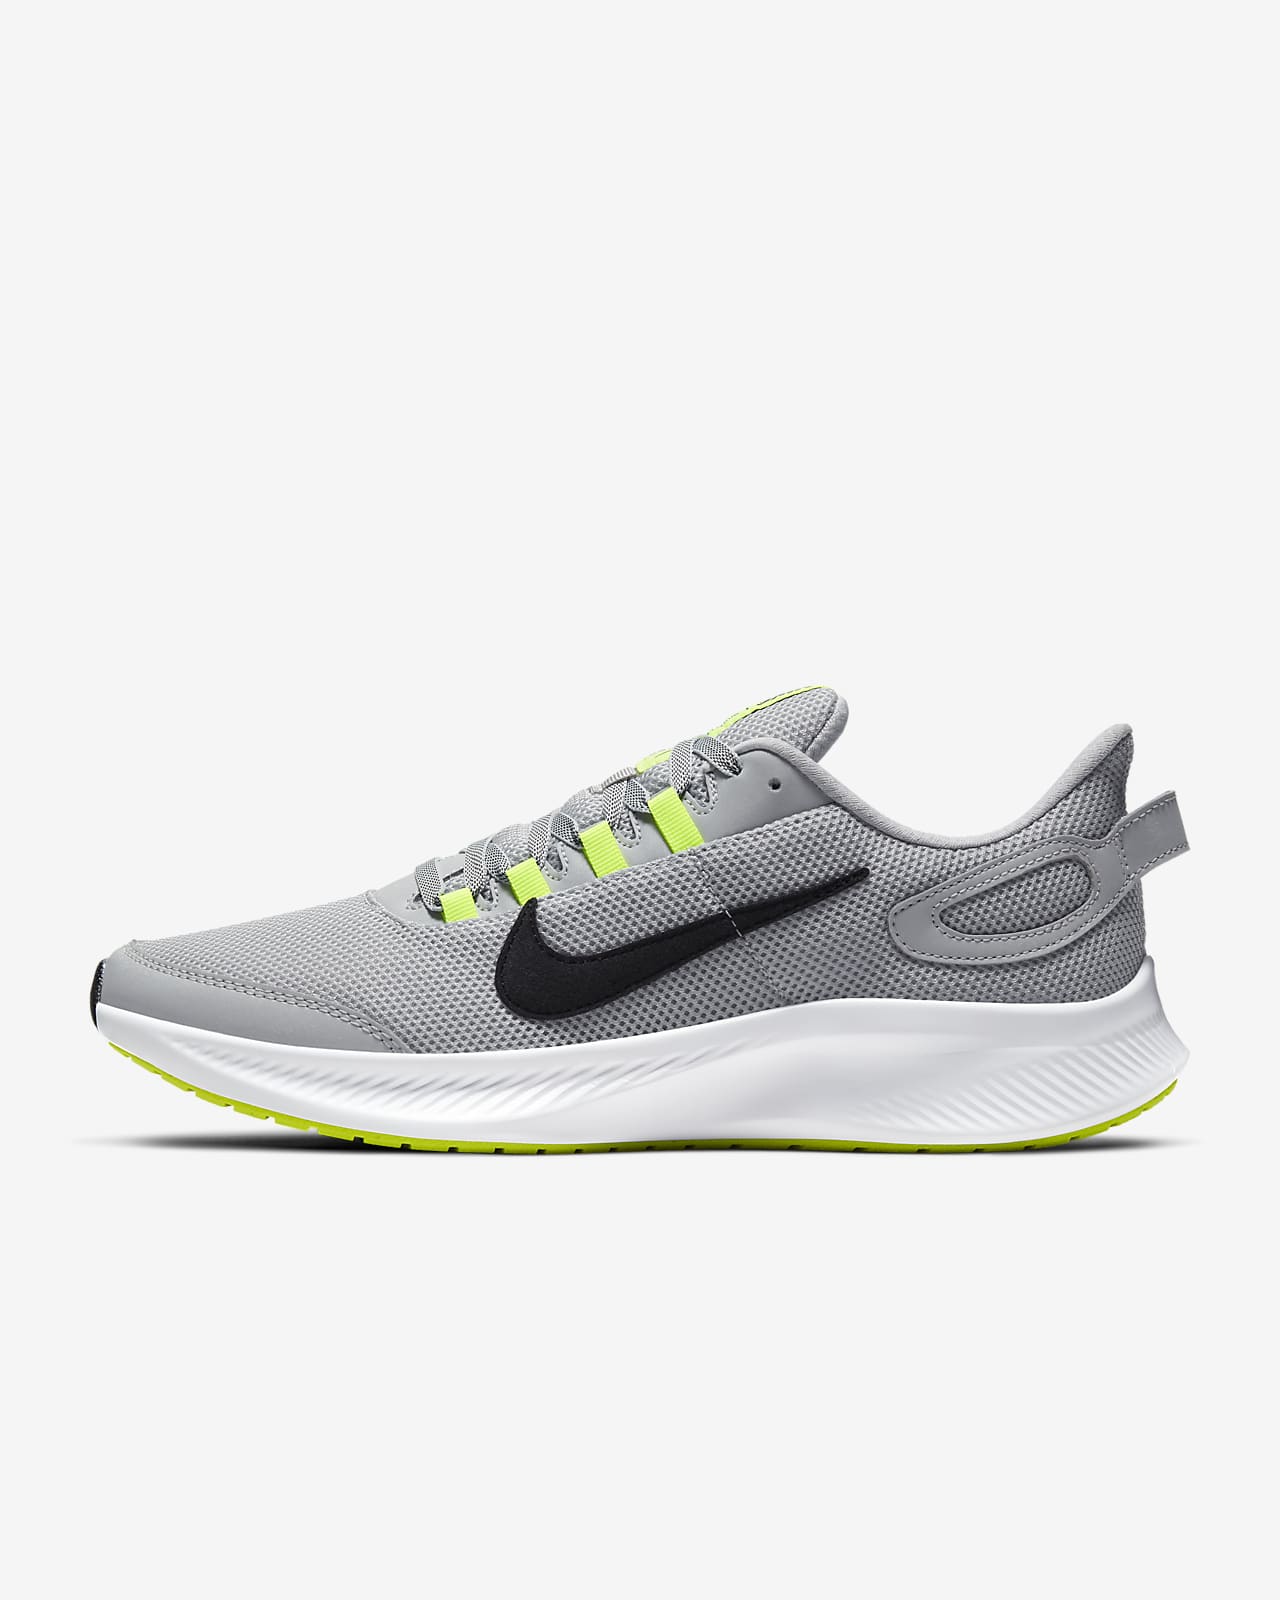 nike run all day mens running shoes